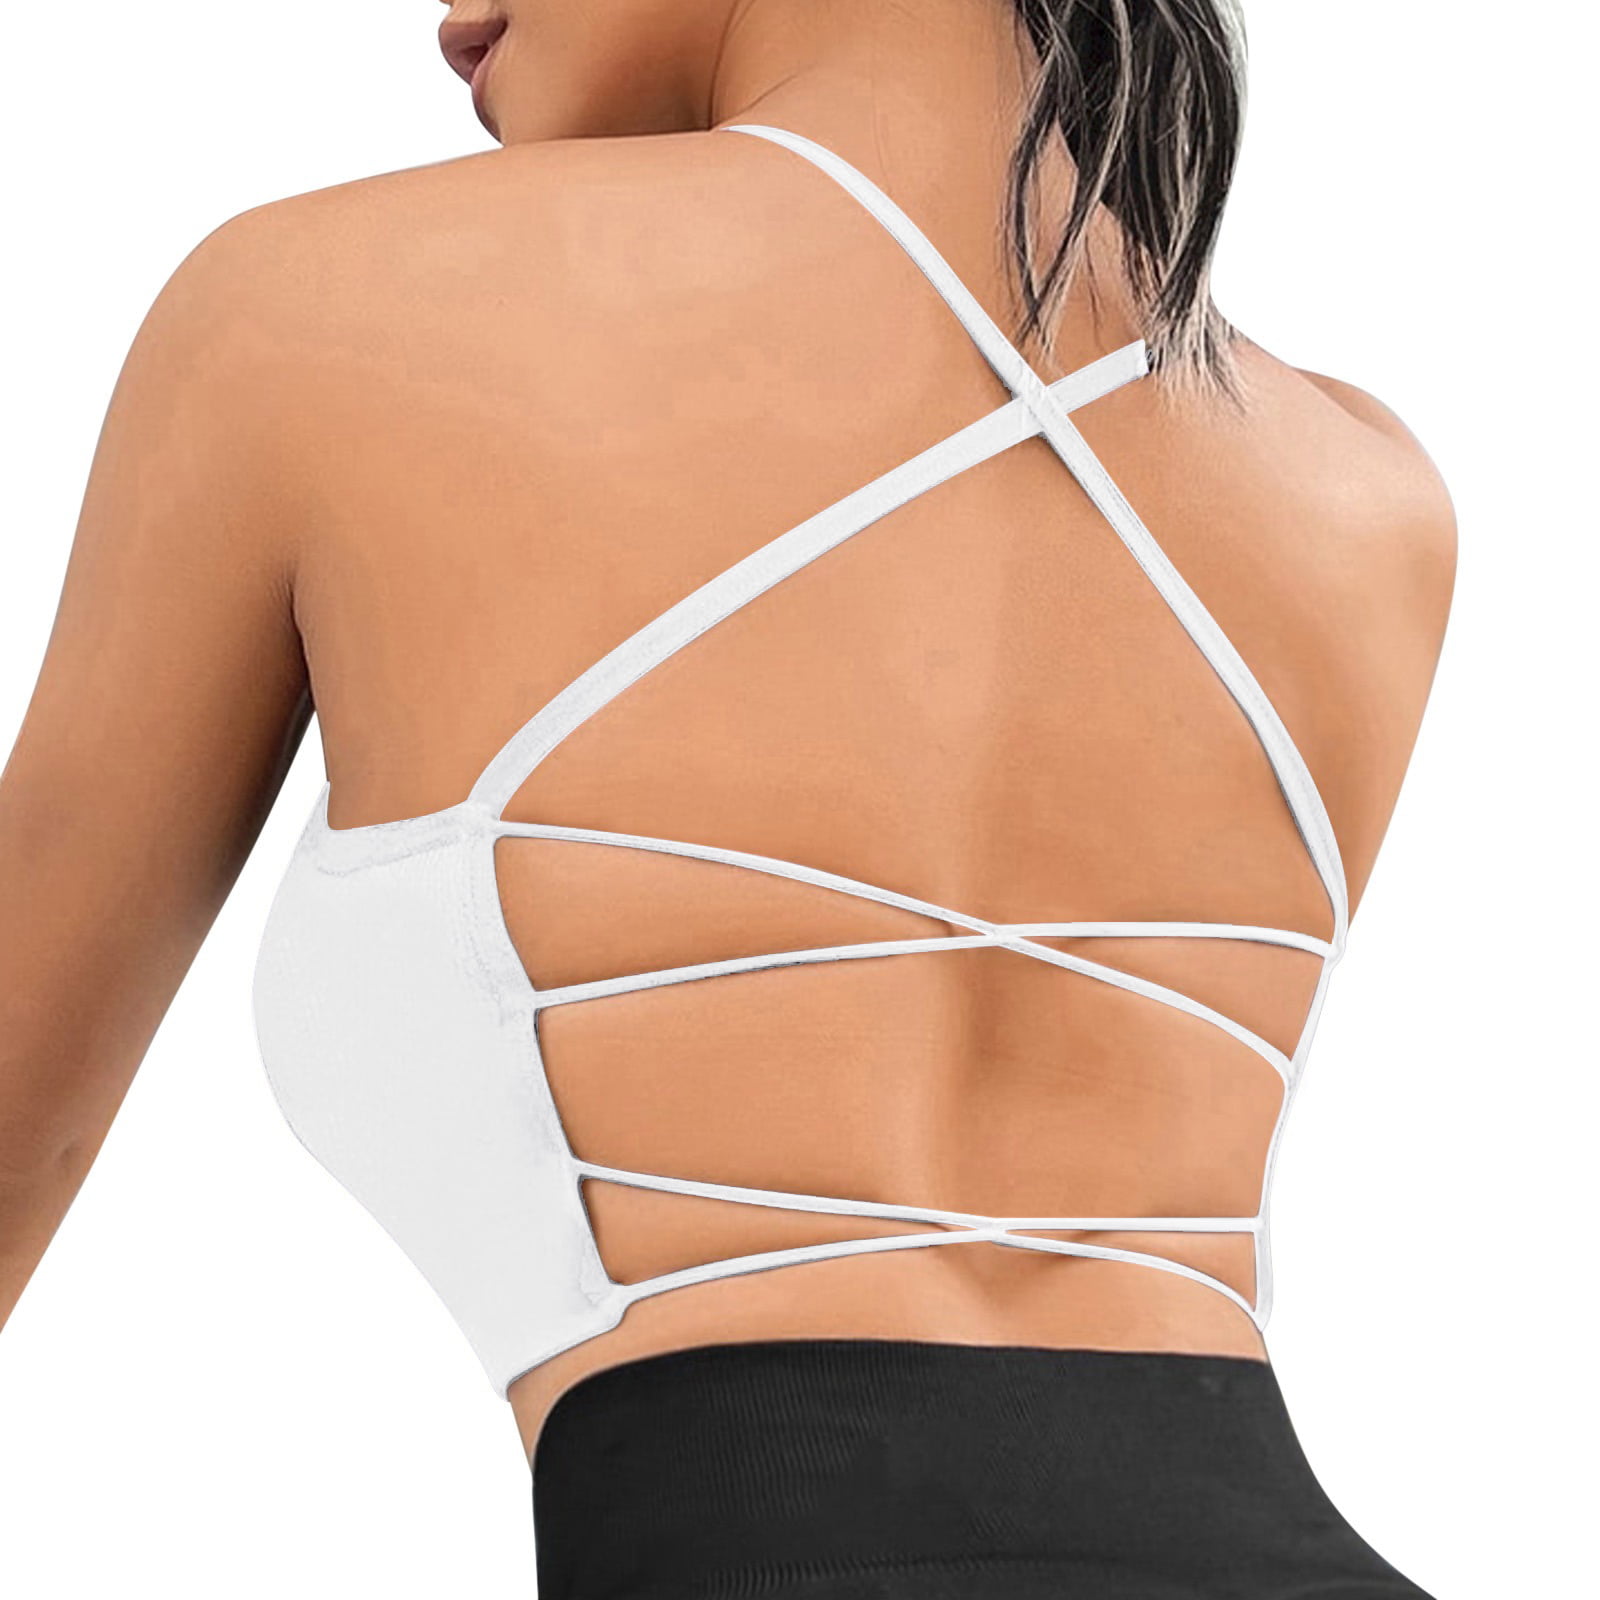 Is That The New Light Support Criss Cross Backless Sports Bra ??